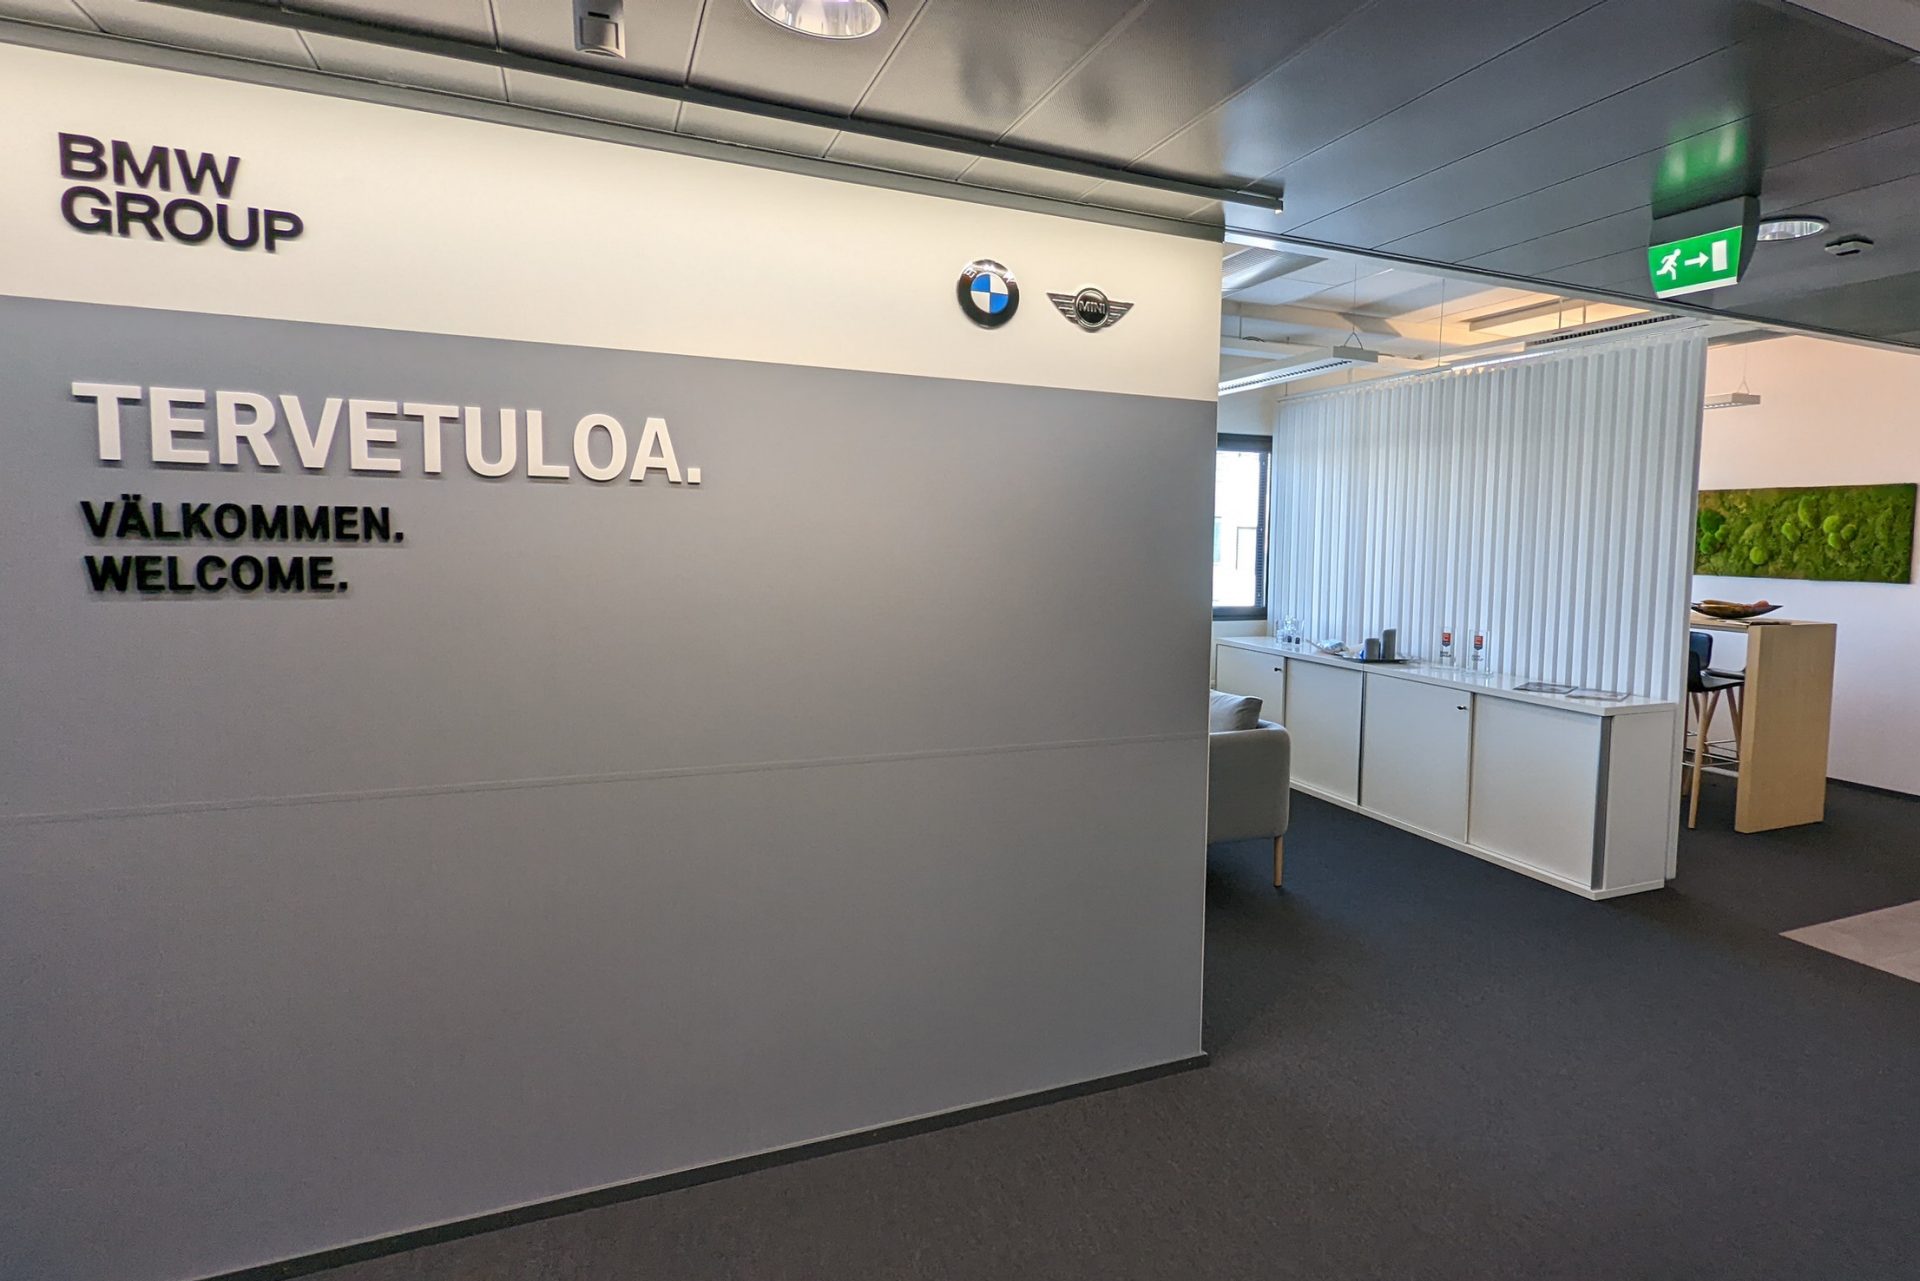 This picture shows the interior-view of a BMW office in Finland.